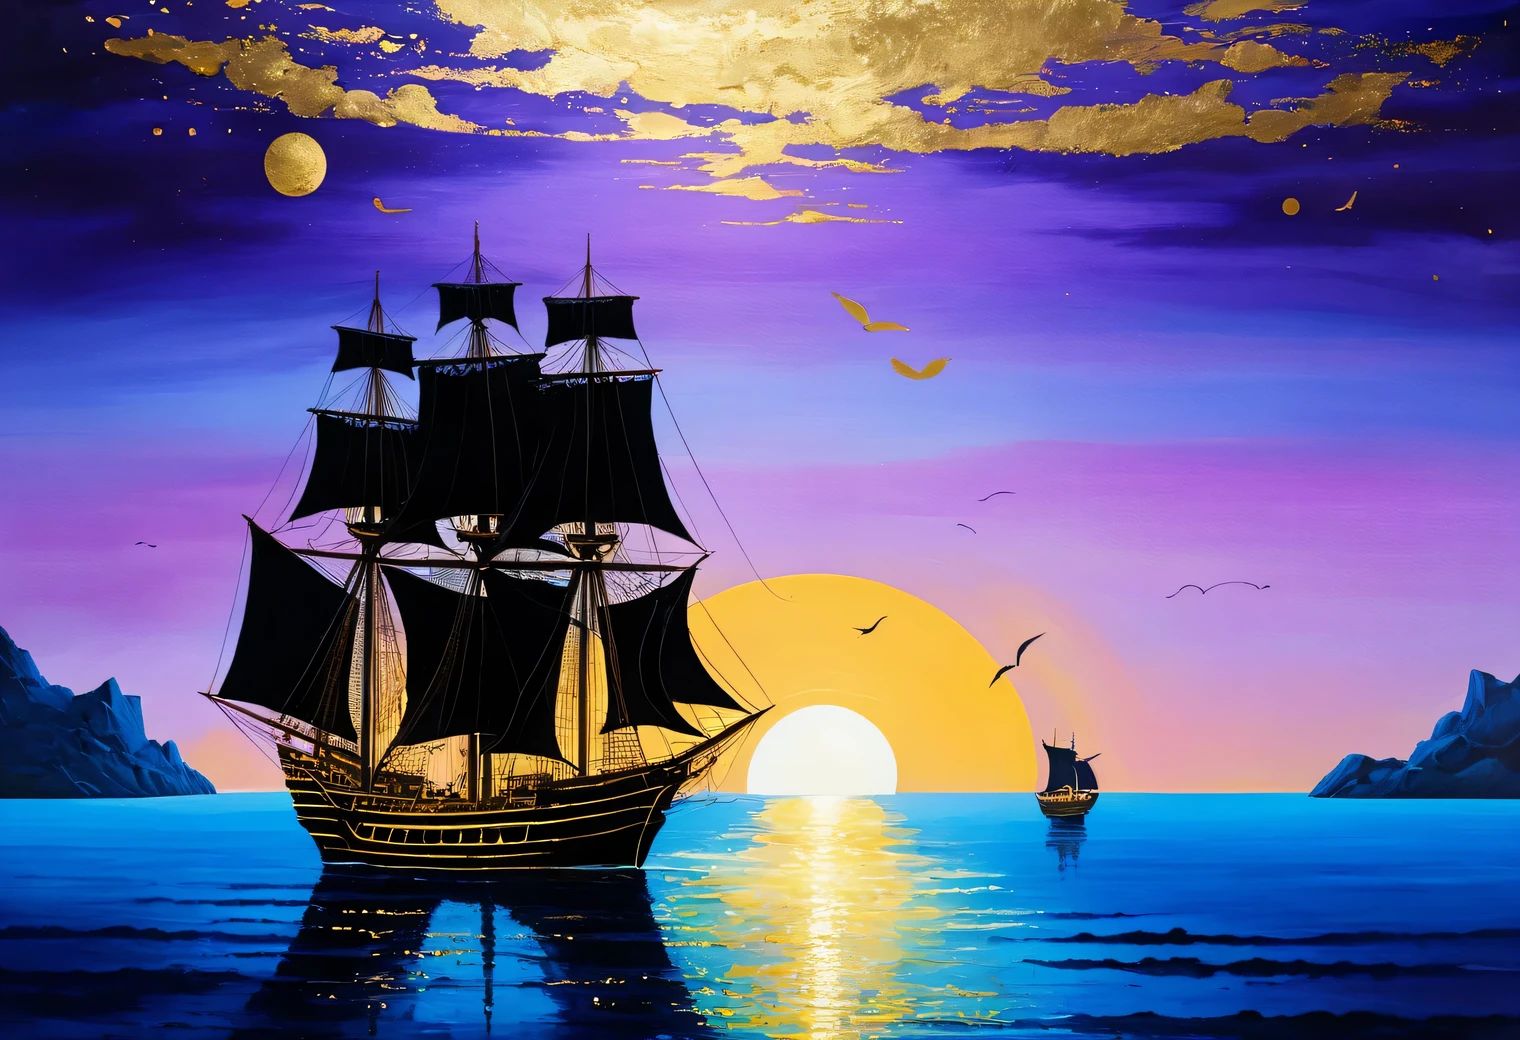 Seascape, combination of black and gold leaf, purple blue background, painting on a blue background, Golden sun in a light blue sky, ship with golden sails on a blue sea, high resolution, surrealismLandscapes of night megalopolises, a combination of black and gold leaf, purple background, painting on a purple background, golden lights of the night megalopolis, high definition, surrealism